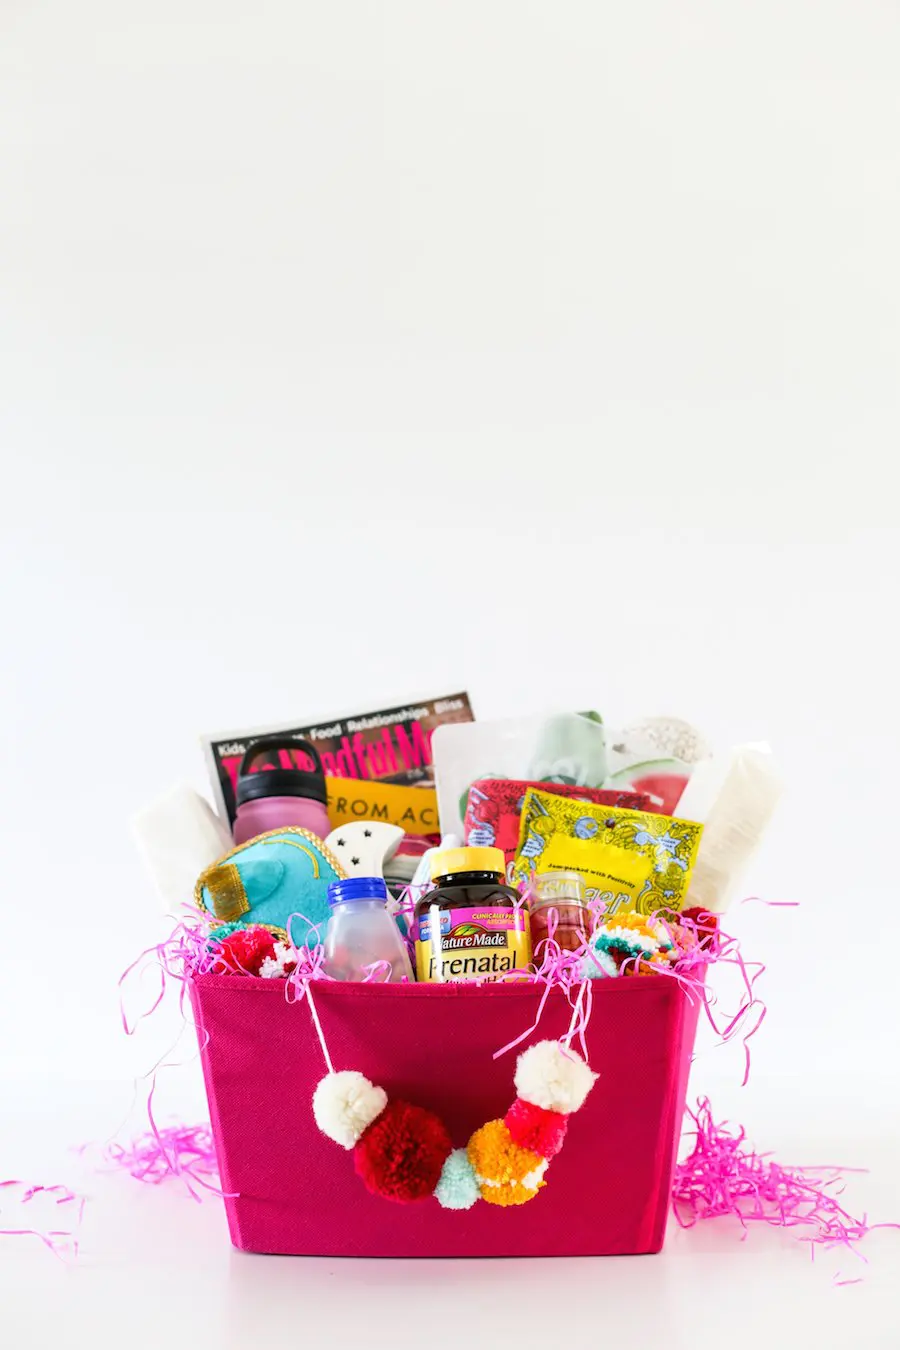 DIY Pregnancy Survival Kit Gift Basket, Pregnancy Care Package, Maternity Care Package, First Trimester, 1st Trimester, Pregnancy Gifts for Friends, Gifts for Pregnant Women, Mama to Be Gift Basket, DIY, Salty Canary